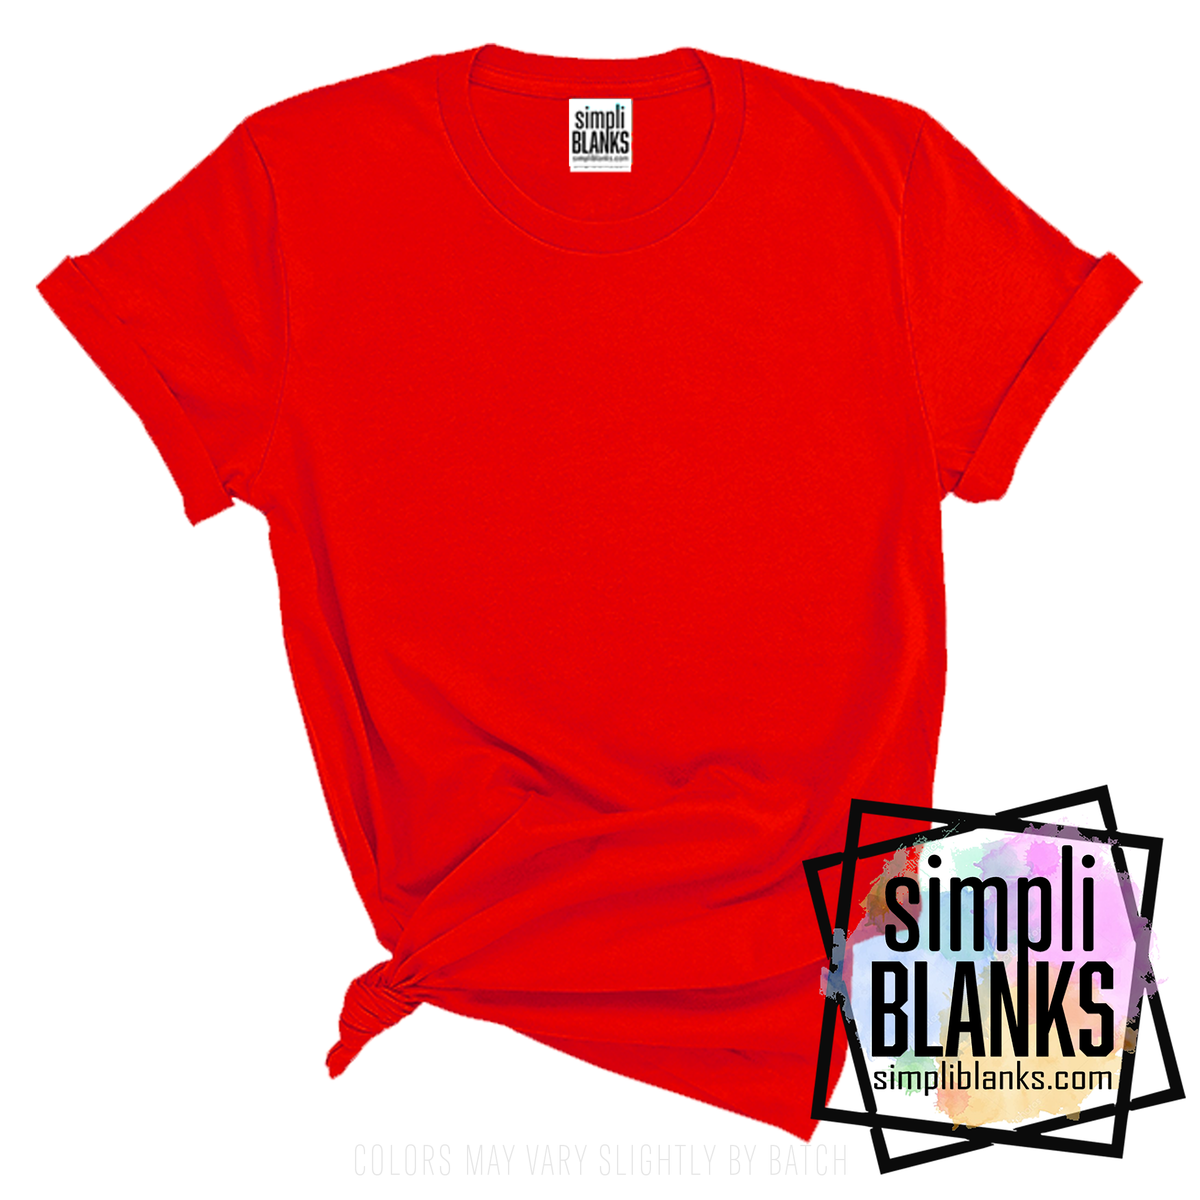 plain red t shirt front and back for girls